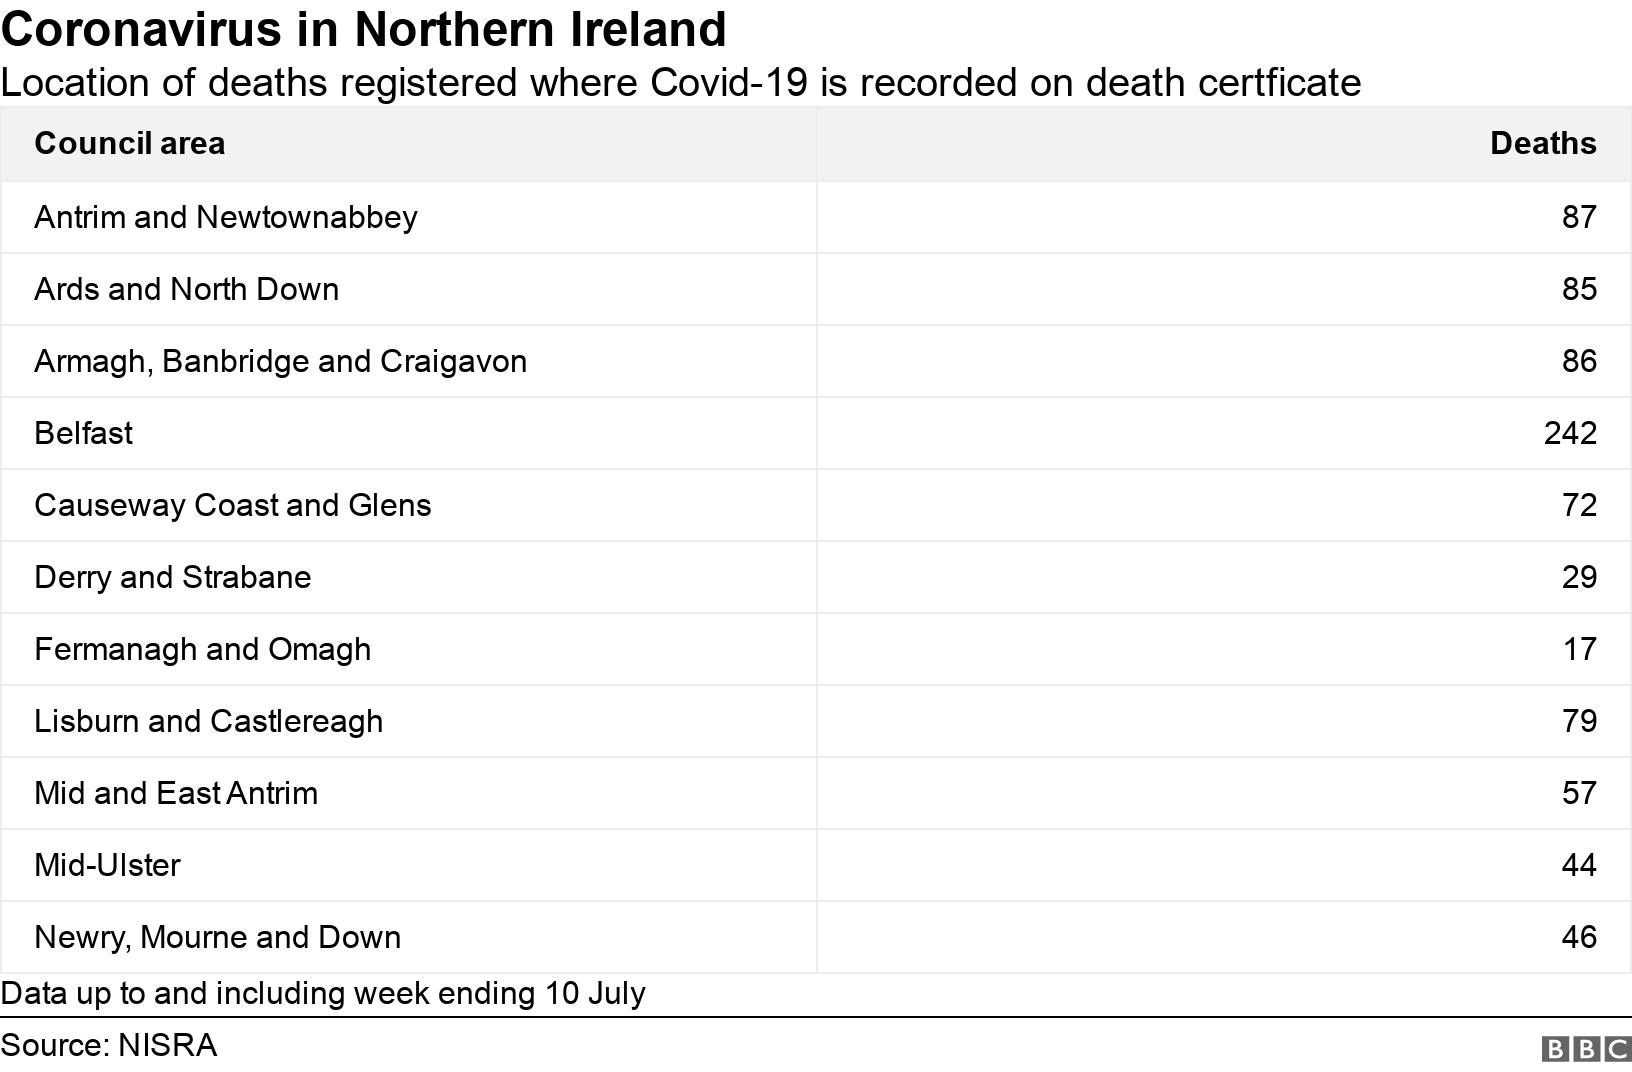 Coronavirus in Northern Ireland. Location of deaths registered where Covid-19 is recorded on death certficate. Data up to and including week ending 10 July.